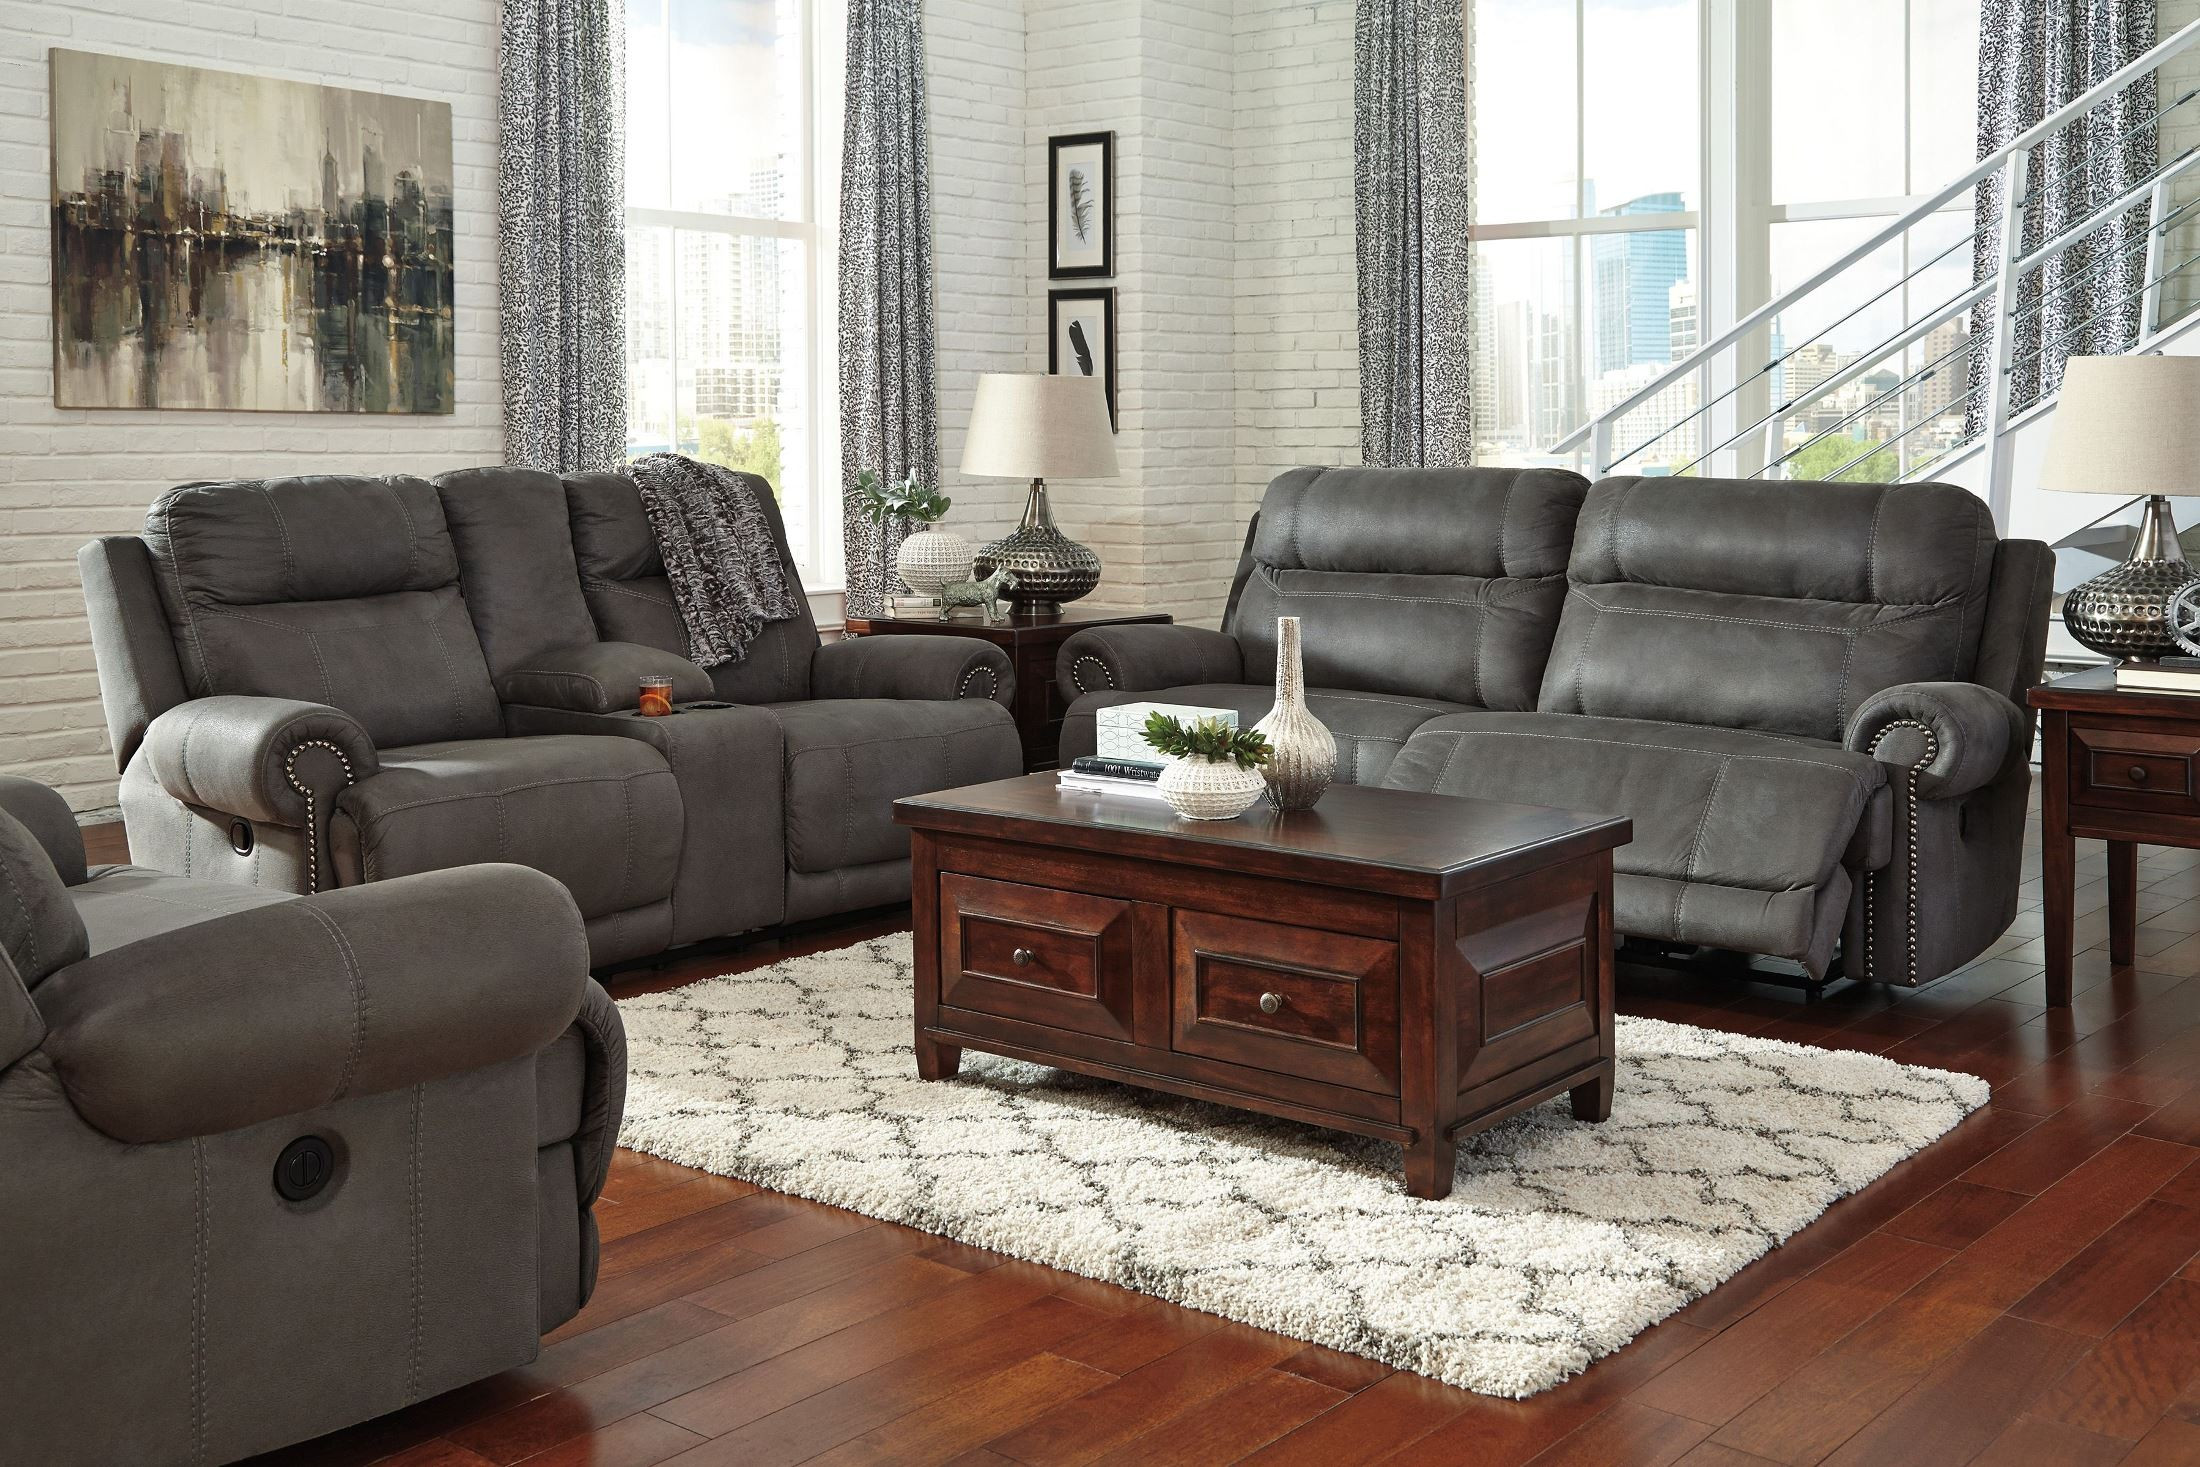 Ashley Furniture Living Room Chairs
 Austere Gray Reclining Living Room Set from Ashley